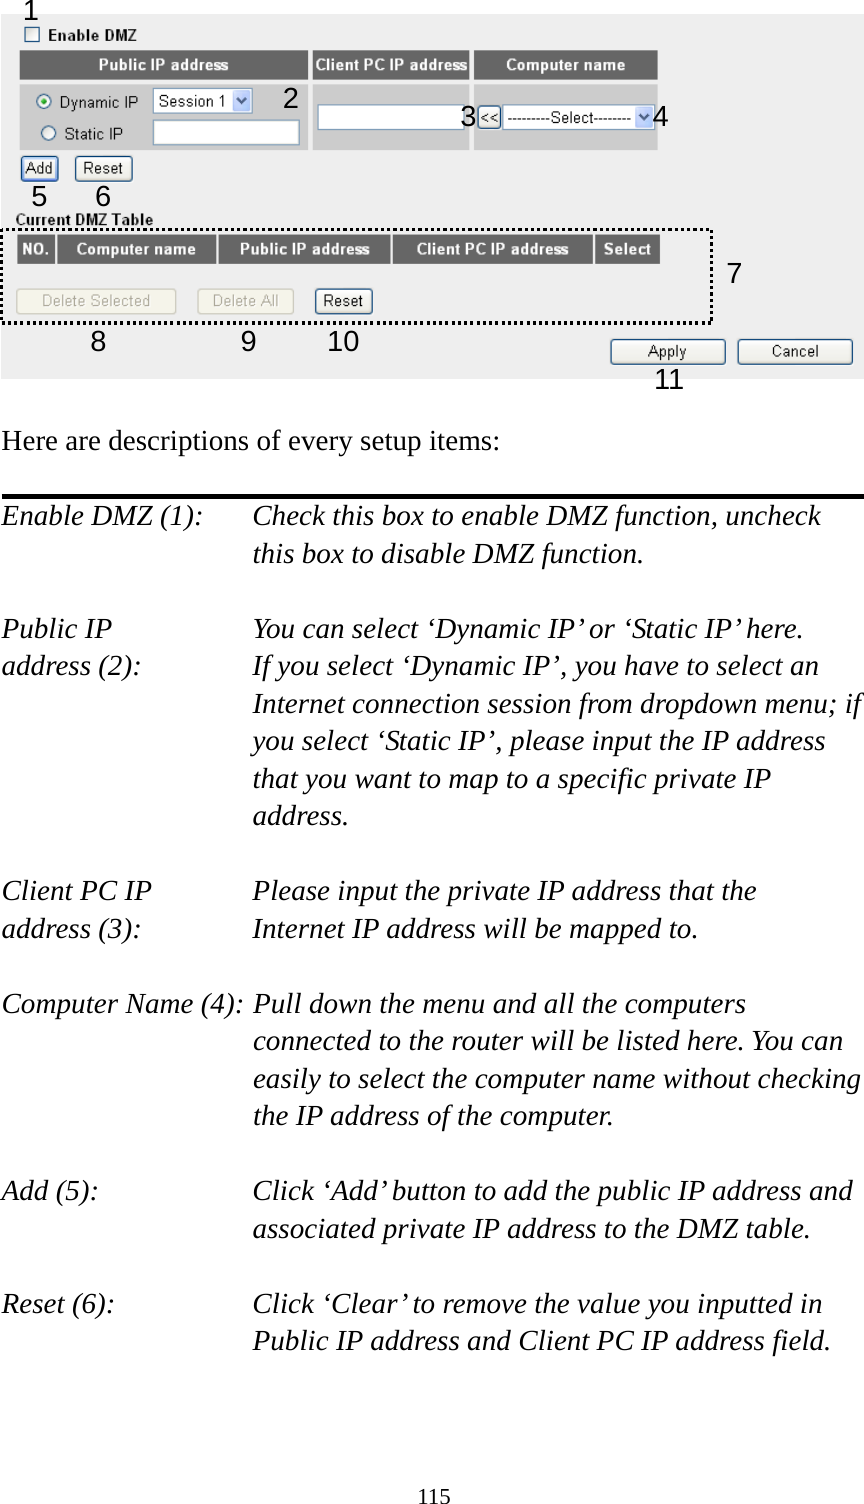 115   Here are descriptions of every setup items:  Enable DMZ (1):    Check this box to enable DMZ function, uncheck this box to disable DMZ function.  Public IP        You can select ‘Dynamic IP’ or ‘Static IP’ here. address (2):    If you select ‘Dynamic IP’, you have to select an Internet connection session from dropdown menu; if you select ‘Static IP’, please input the IP address that you want to map to a specific private IP address.  Client PC IP      Please input the private IP address that the address (3):      Internet IP address will be mapped to.  Computer Name (4): Pull down the menu and all the computers connected to the router will be listed here. You can easily to select the computer name without checking the IP address of the computer.  Add (5):    Click ‘Add’ button to add the public IP address and associated private IP address to the DMZ table.  Reset (6):    Click ‘Clear’ to remove the value you inputted in Public IP address and Client PC IP address field.   1 2  45 6 7 8 9 10113